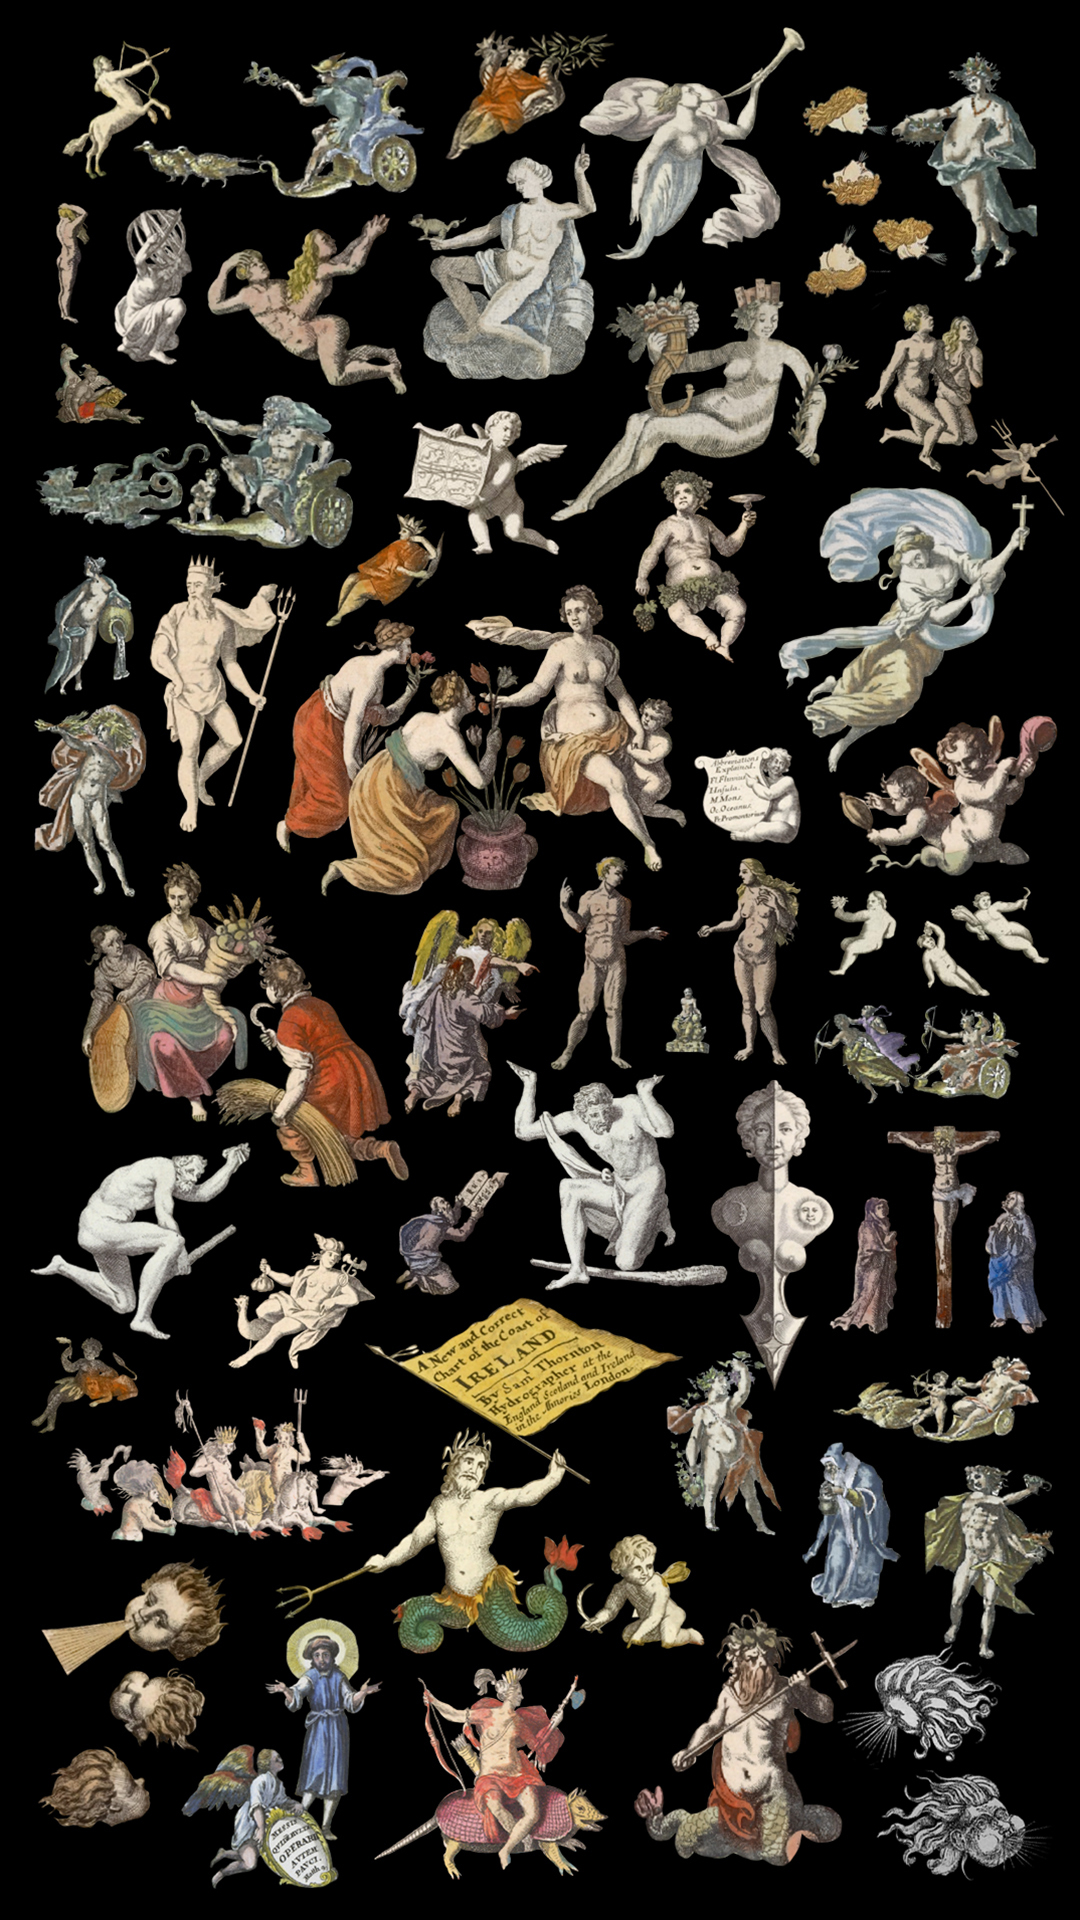 A collage of cutouts against a black backdrop, showing mythic figures like Greek gods and goddesses, figures symbolic of the four elements, angels, and merpeople